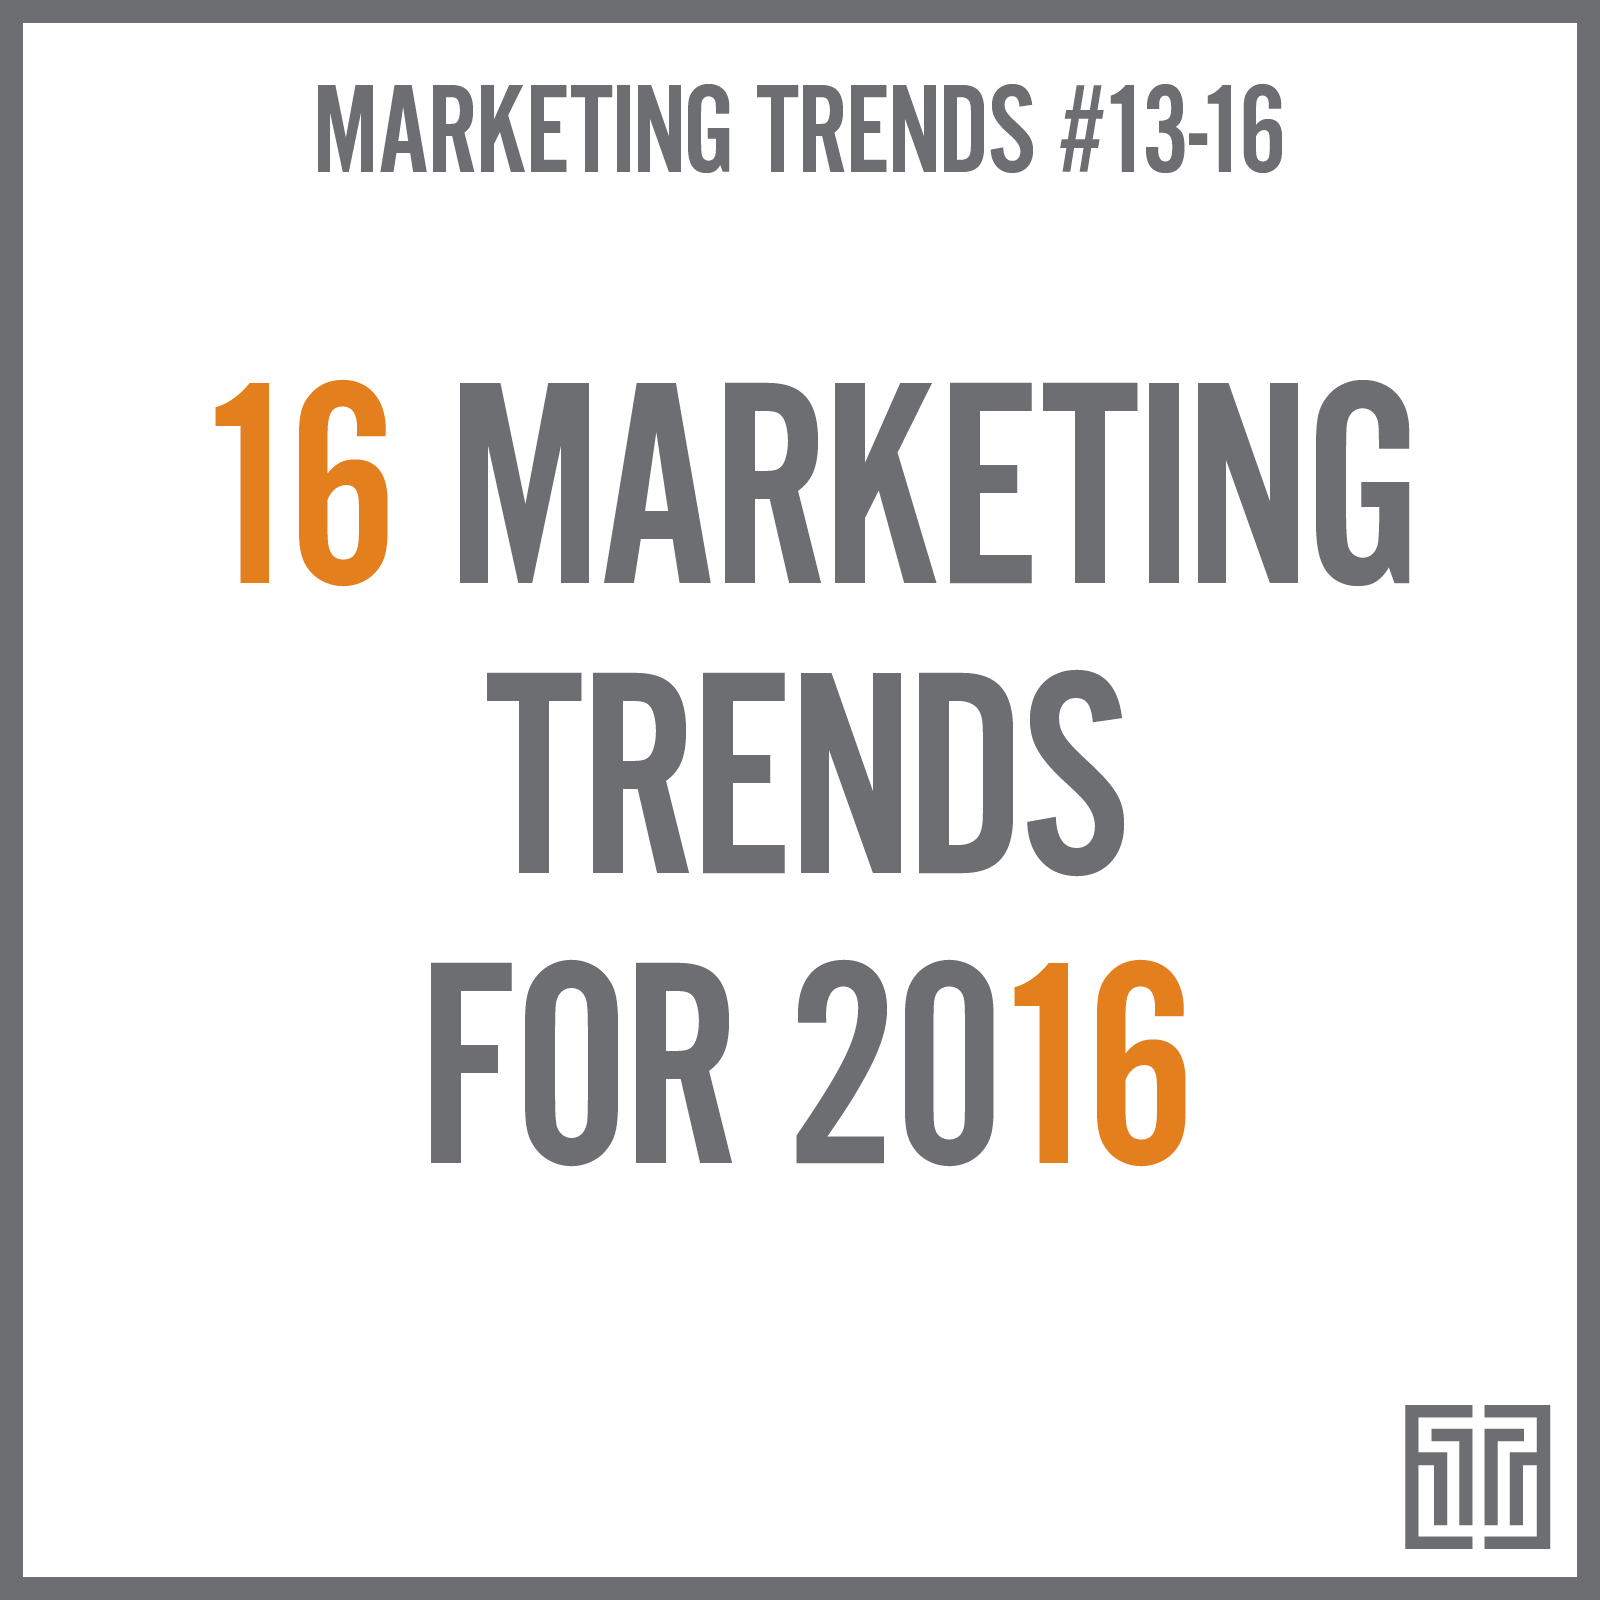 16 Marketing Trends for 2016: Trends 13-16